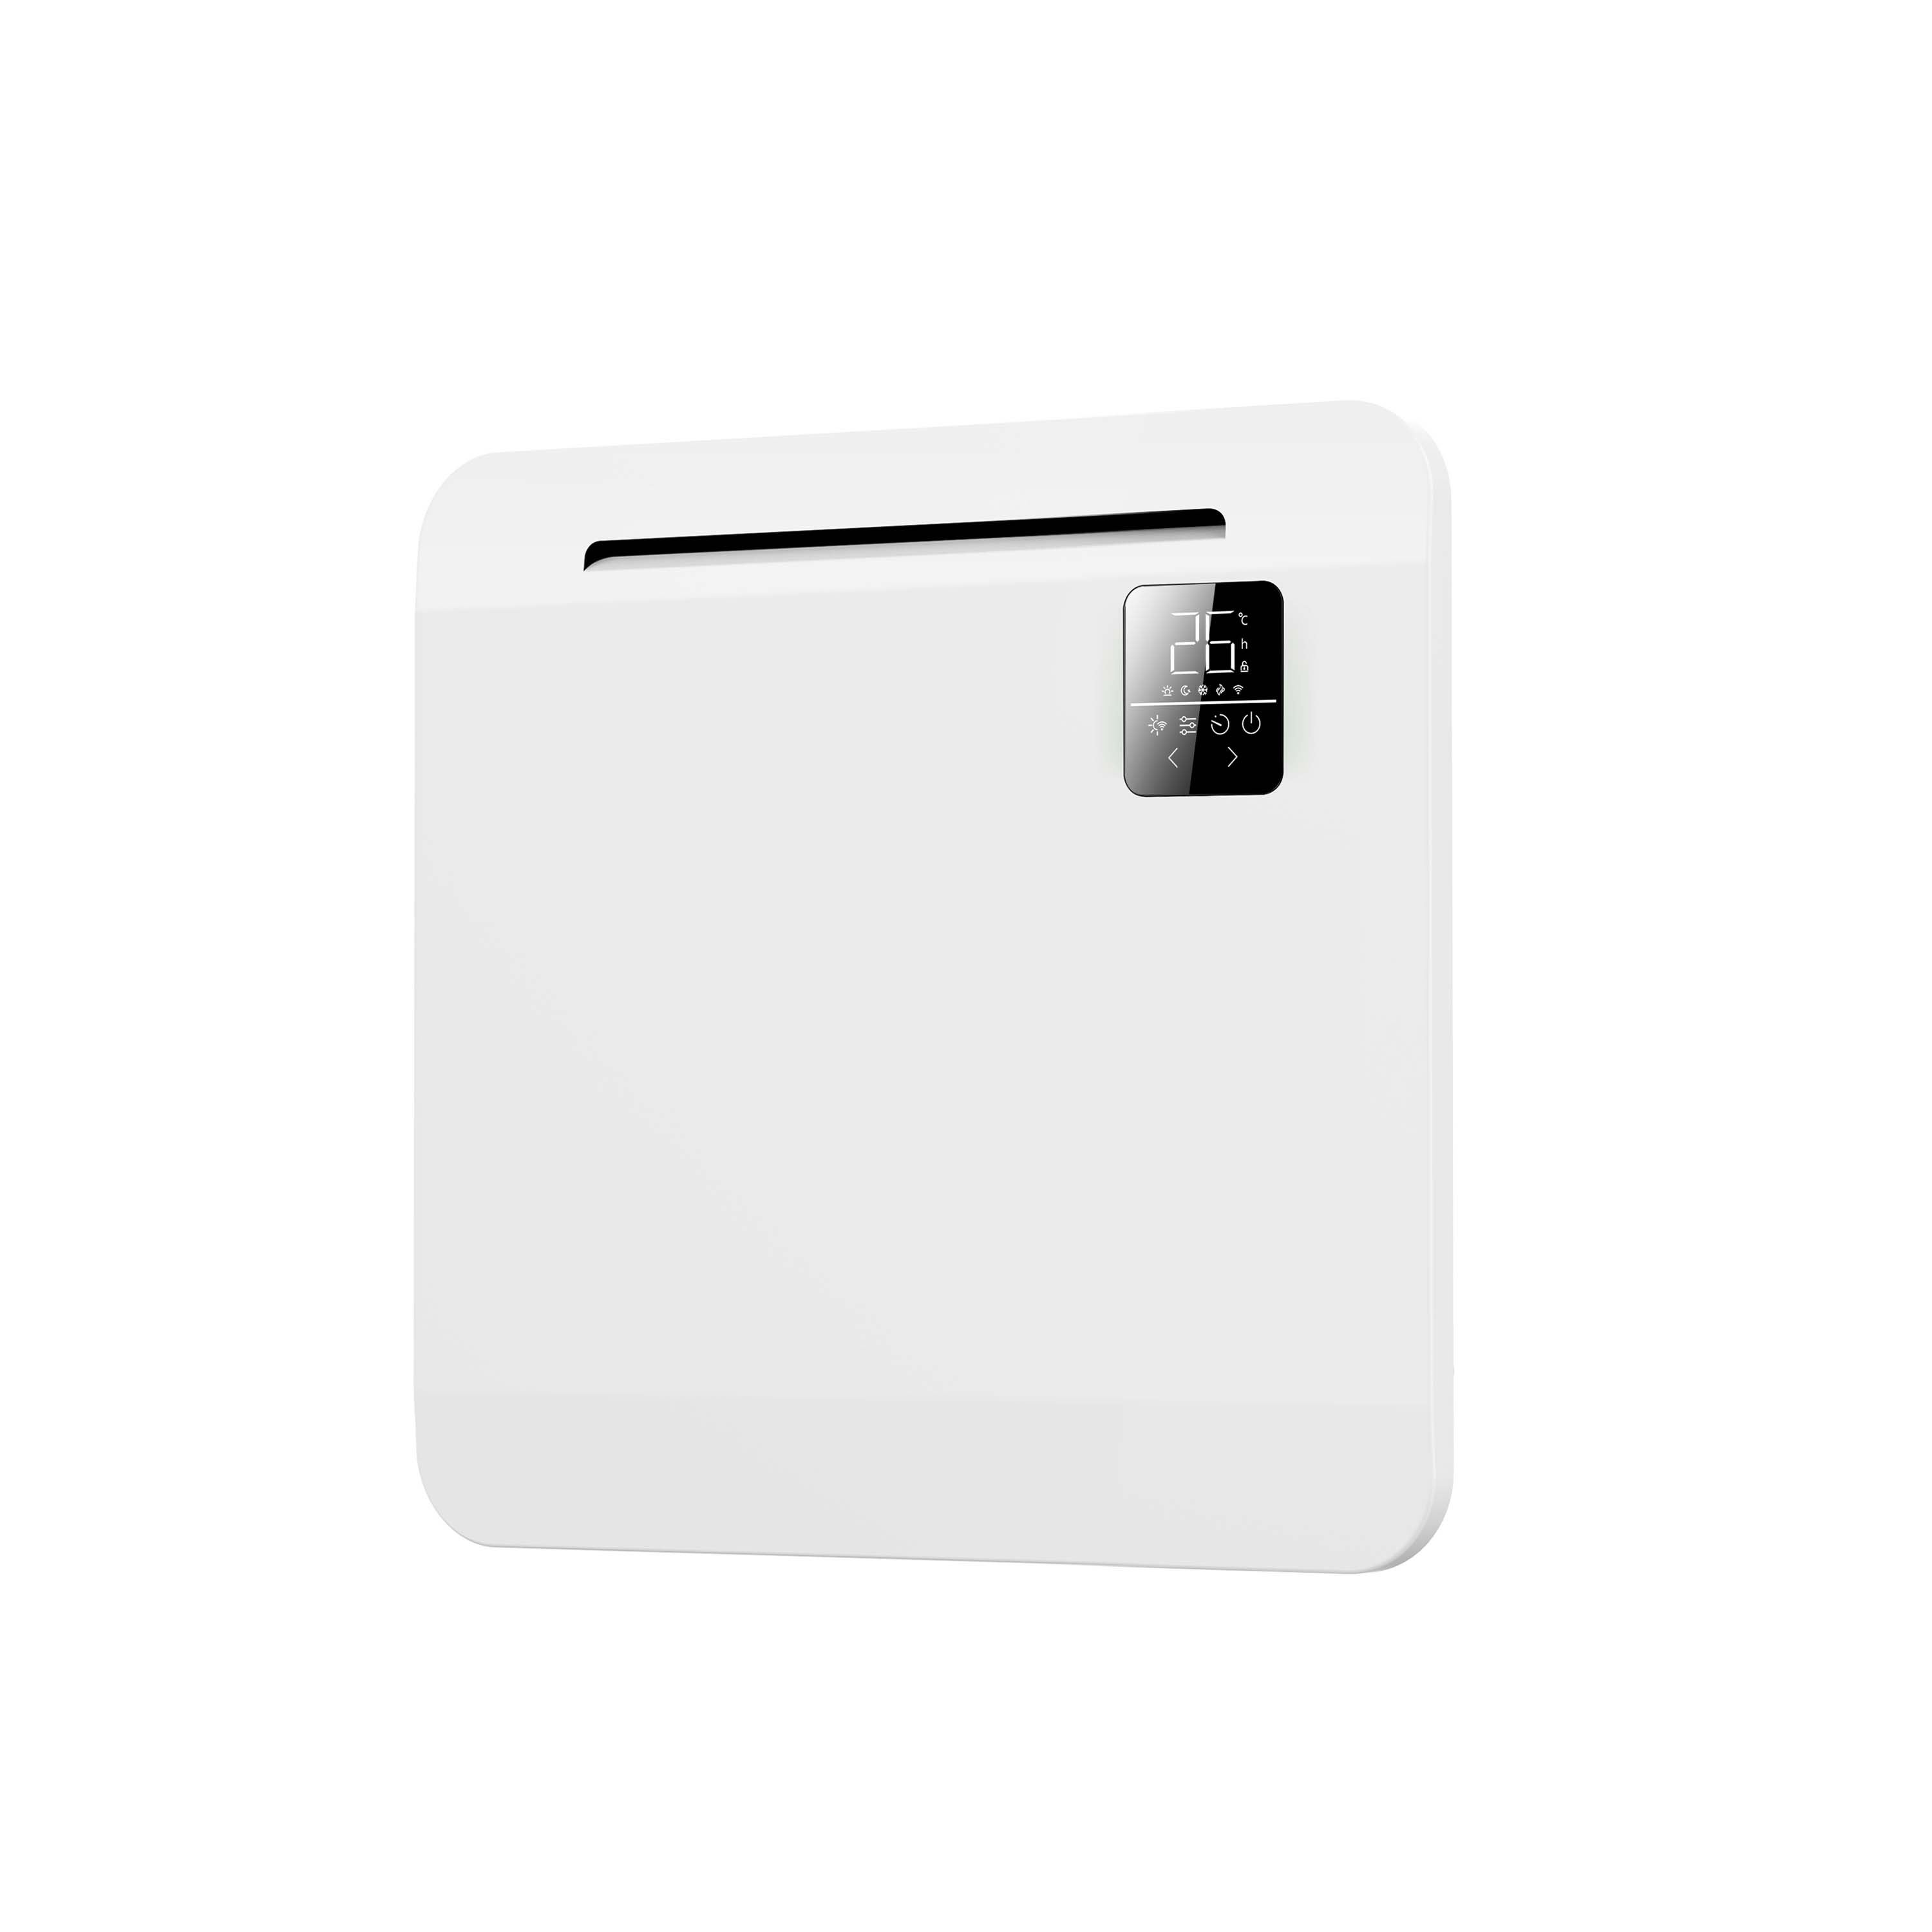 Wall Heater With Wifi App Control